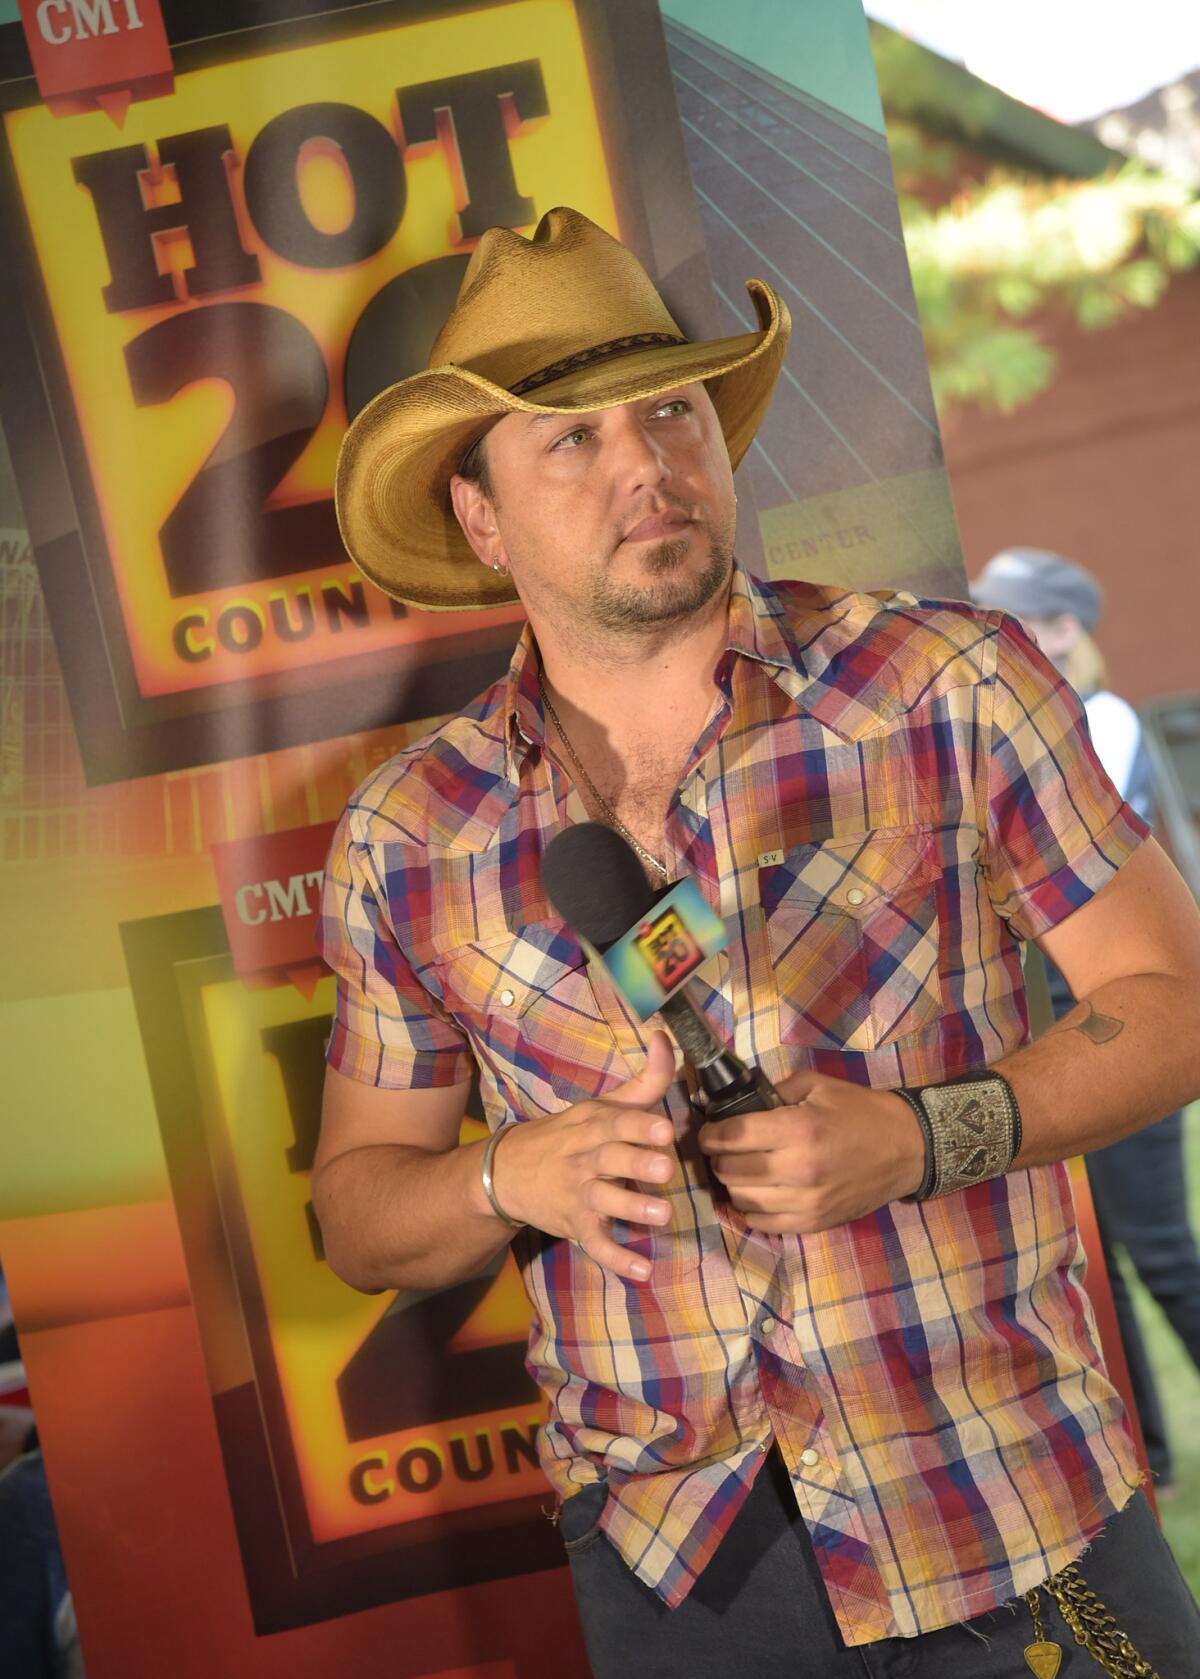 Jason Aldean defended his relationship with Brittany Kerr via Instagram on Sunday.